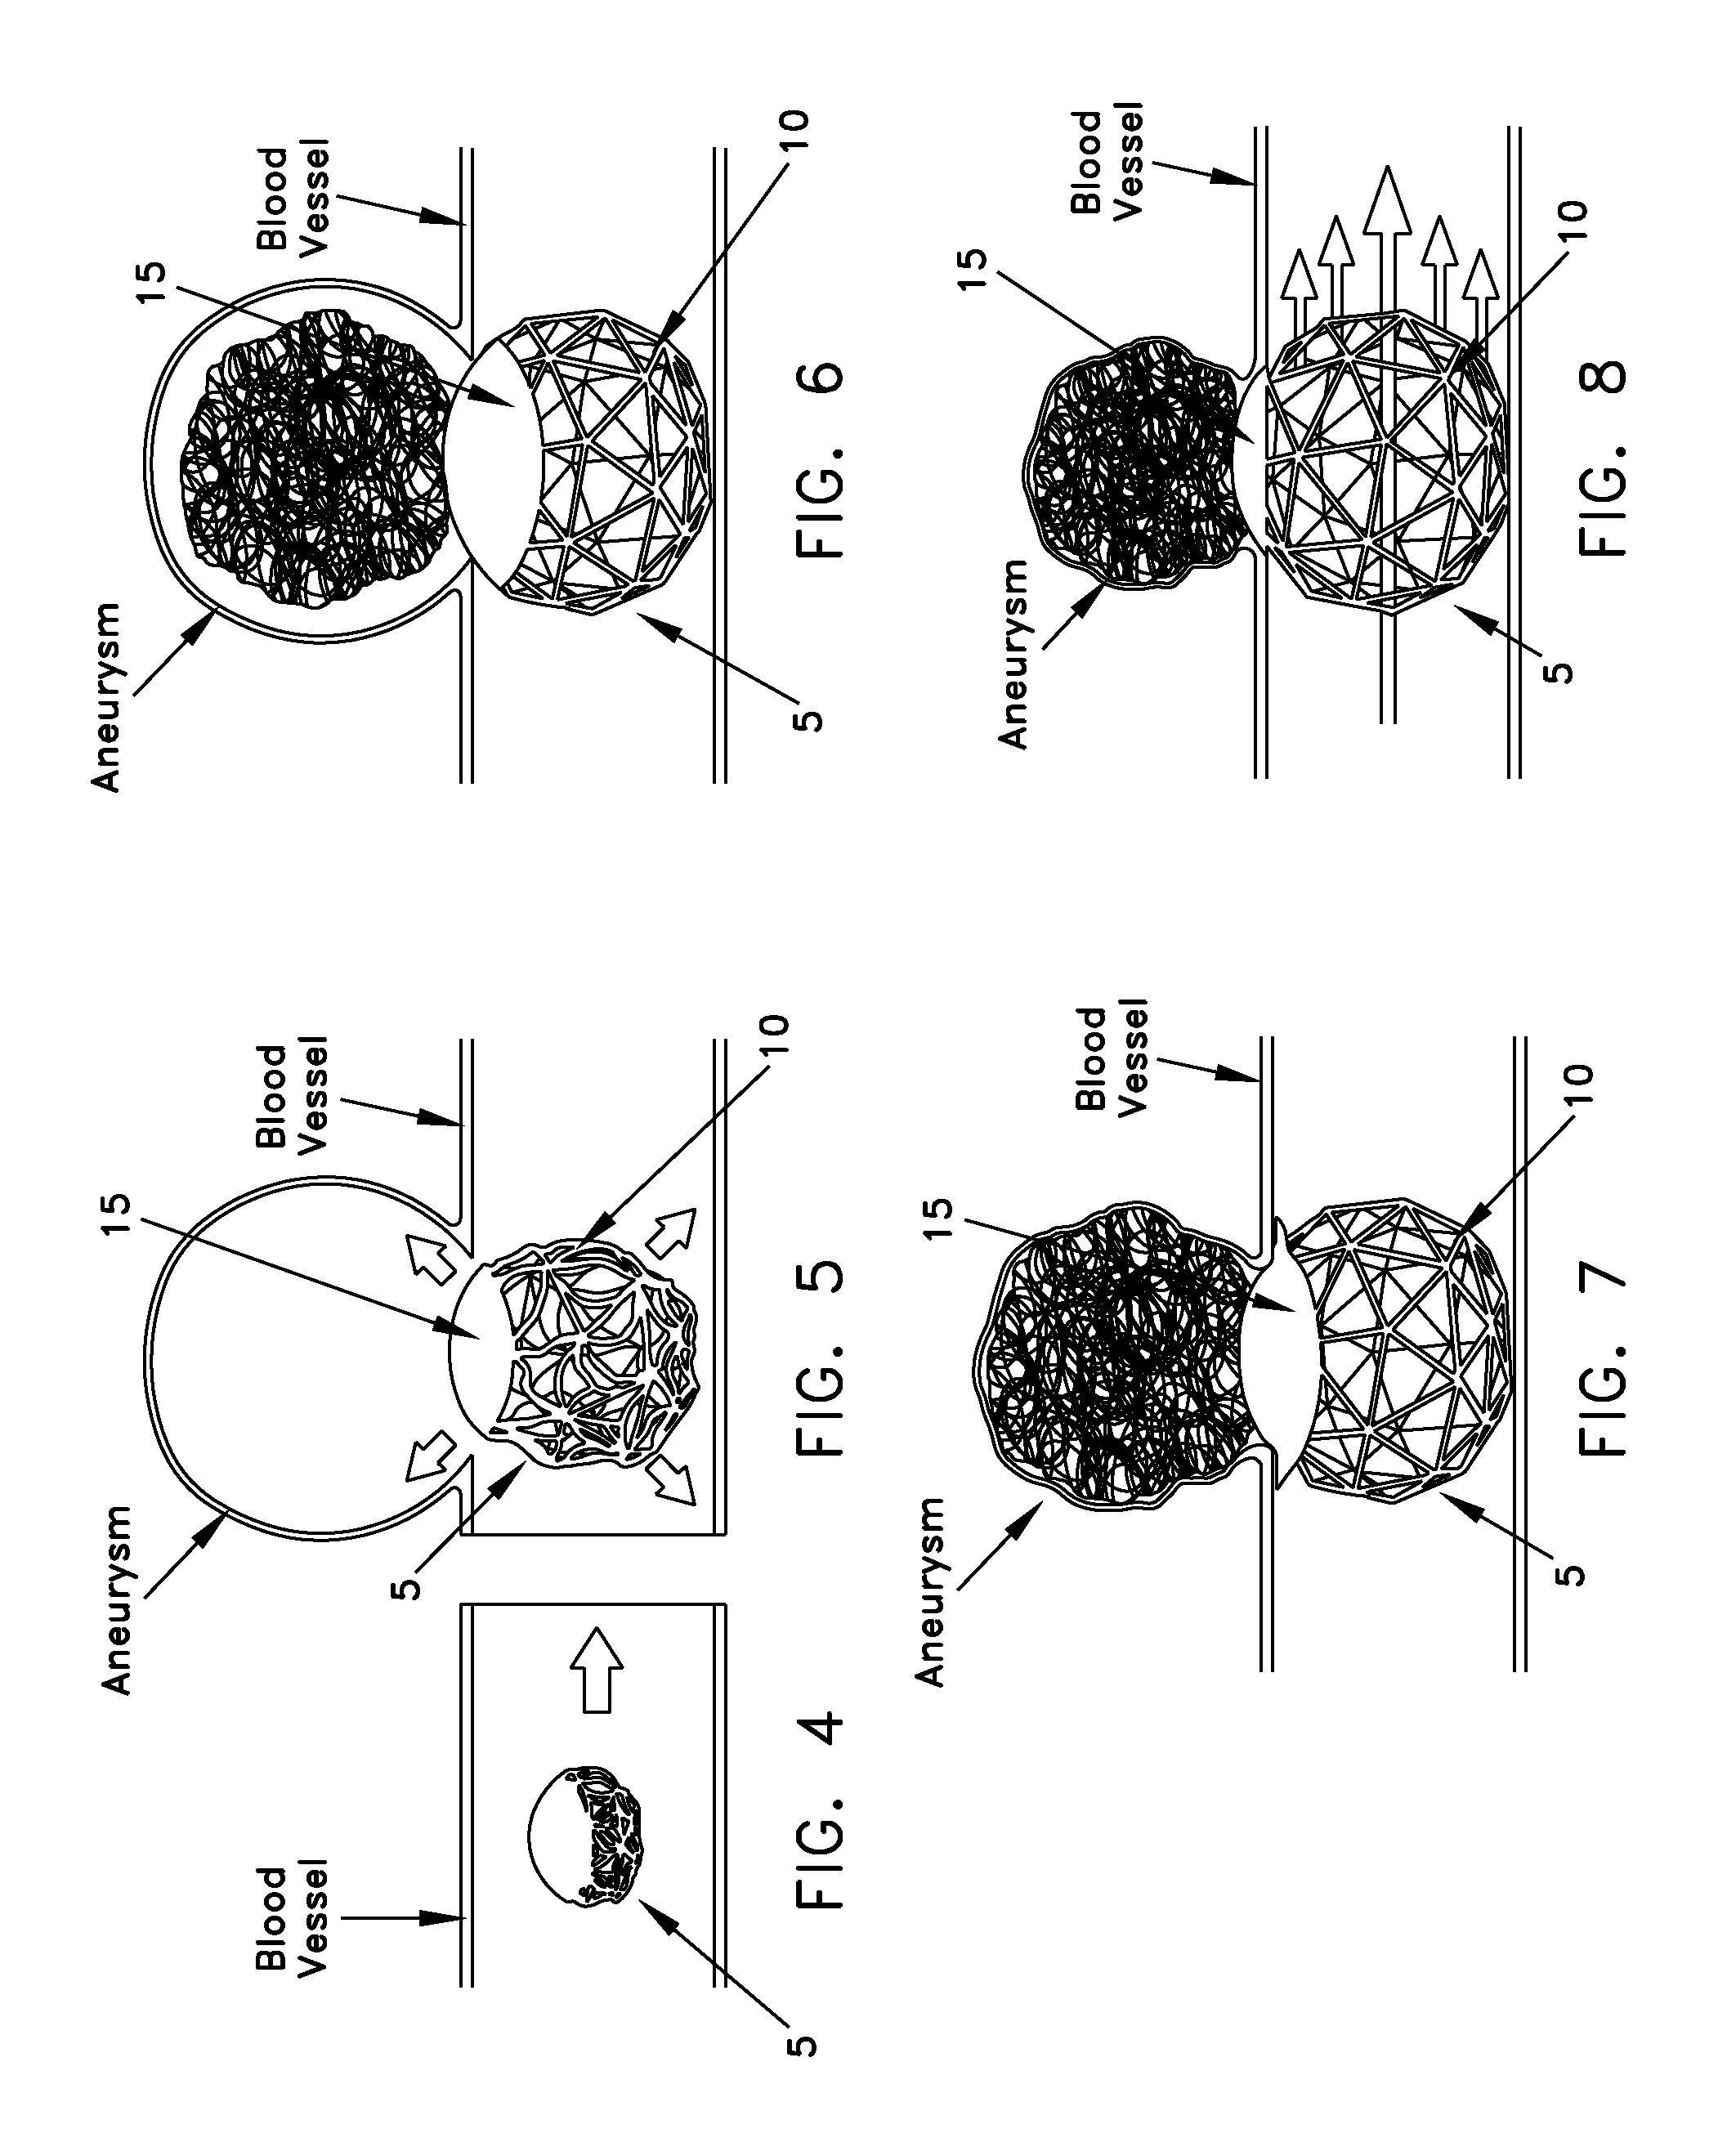 Method and apparatus for restricting flow through an opening in the side wall